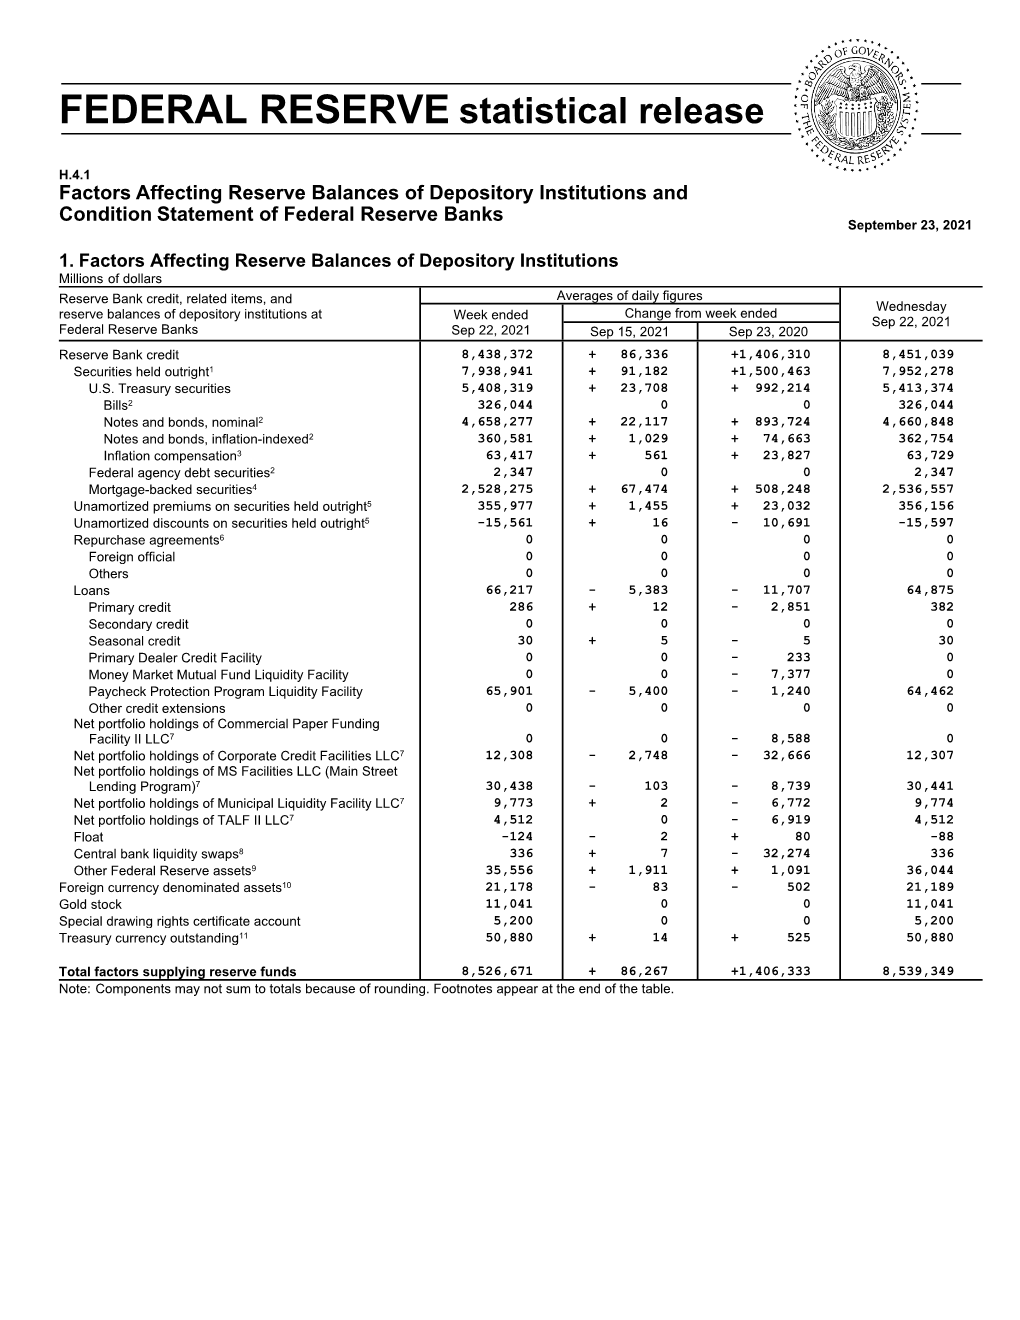 FEDERAL RESERVE Statistical Release